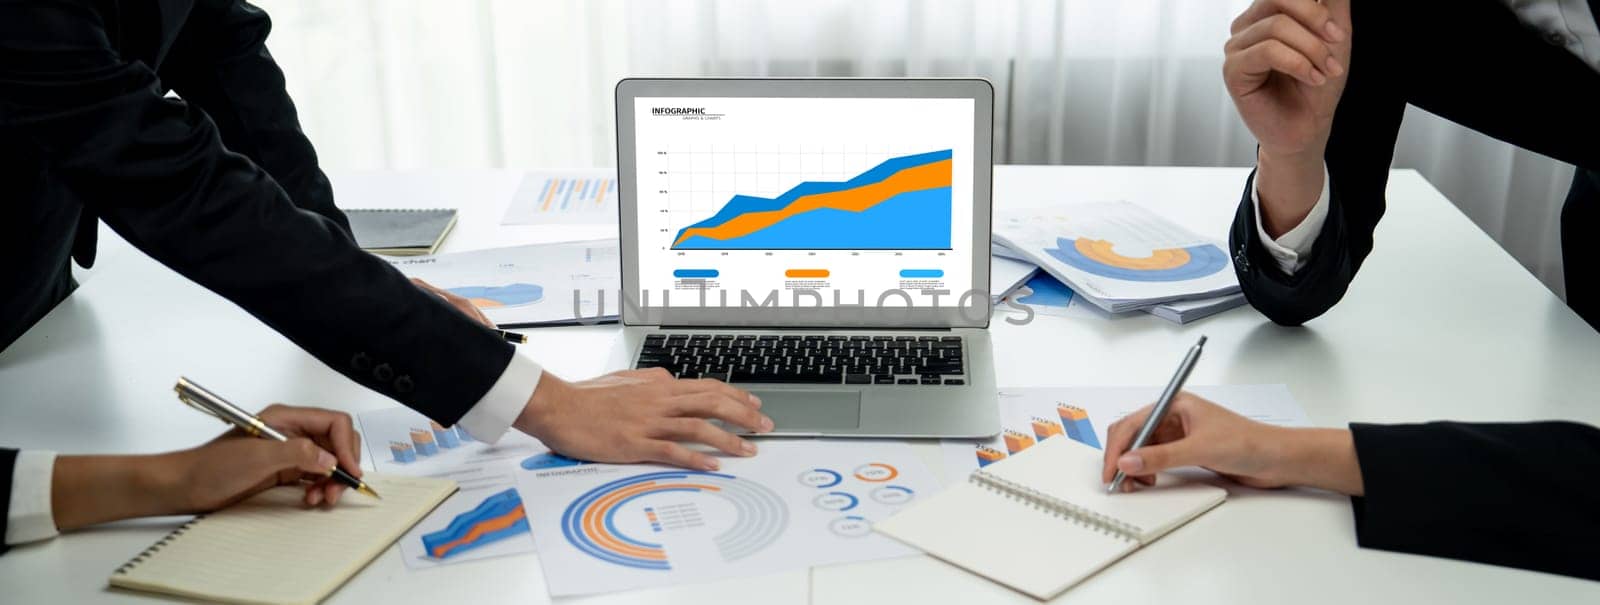 Business data dashboard analysis by computer software investment oratory by biancoblue